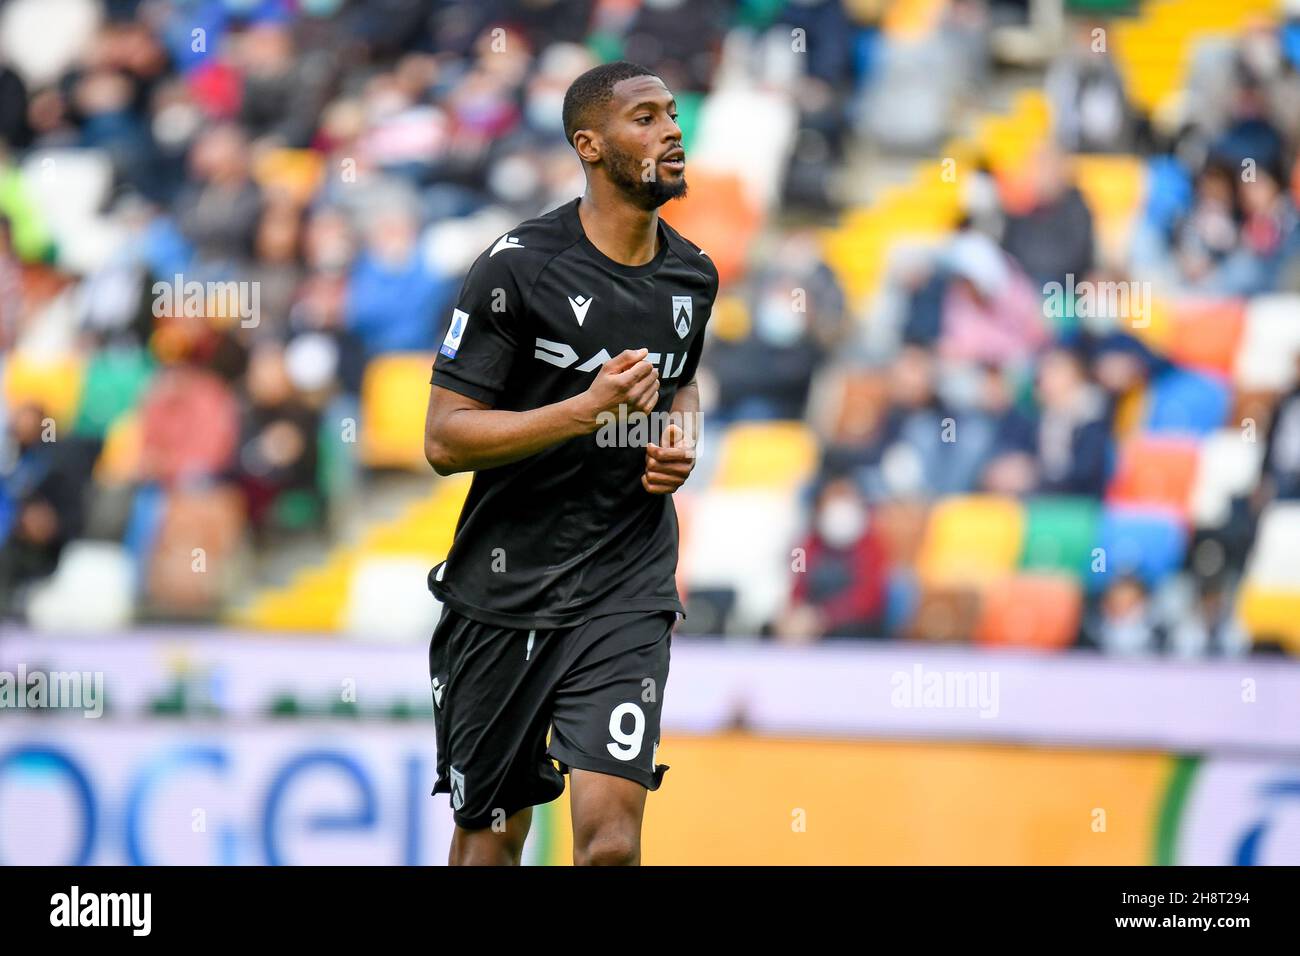 Udine, Italy. 28th Nov, 2021. Norberto Bercique Gomes Betuncal (Udinese) portrait during Udinese Calcio vs Genoa CFC, italian soccer Serie A match in Udine, Italy, November 28 2021 Credit: Independent Photo Agency/Alamy Live News Stock Photo